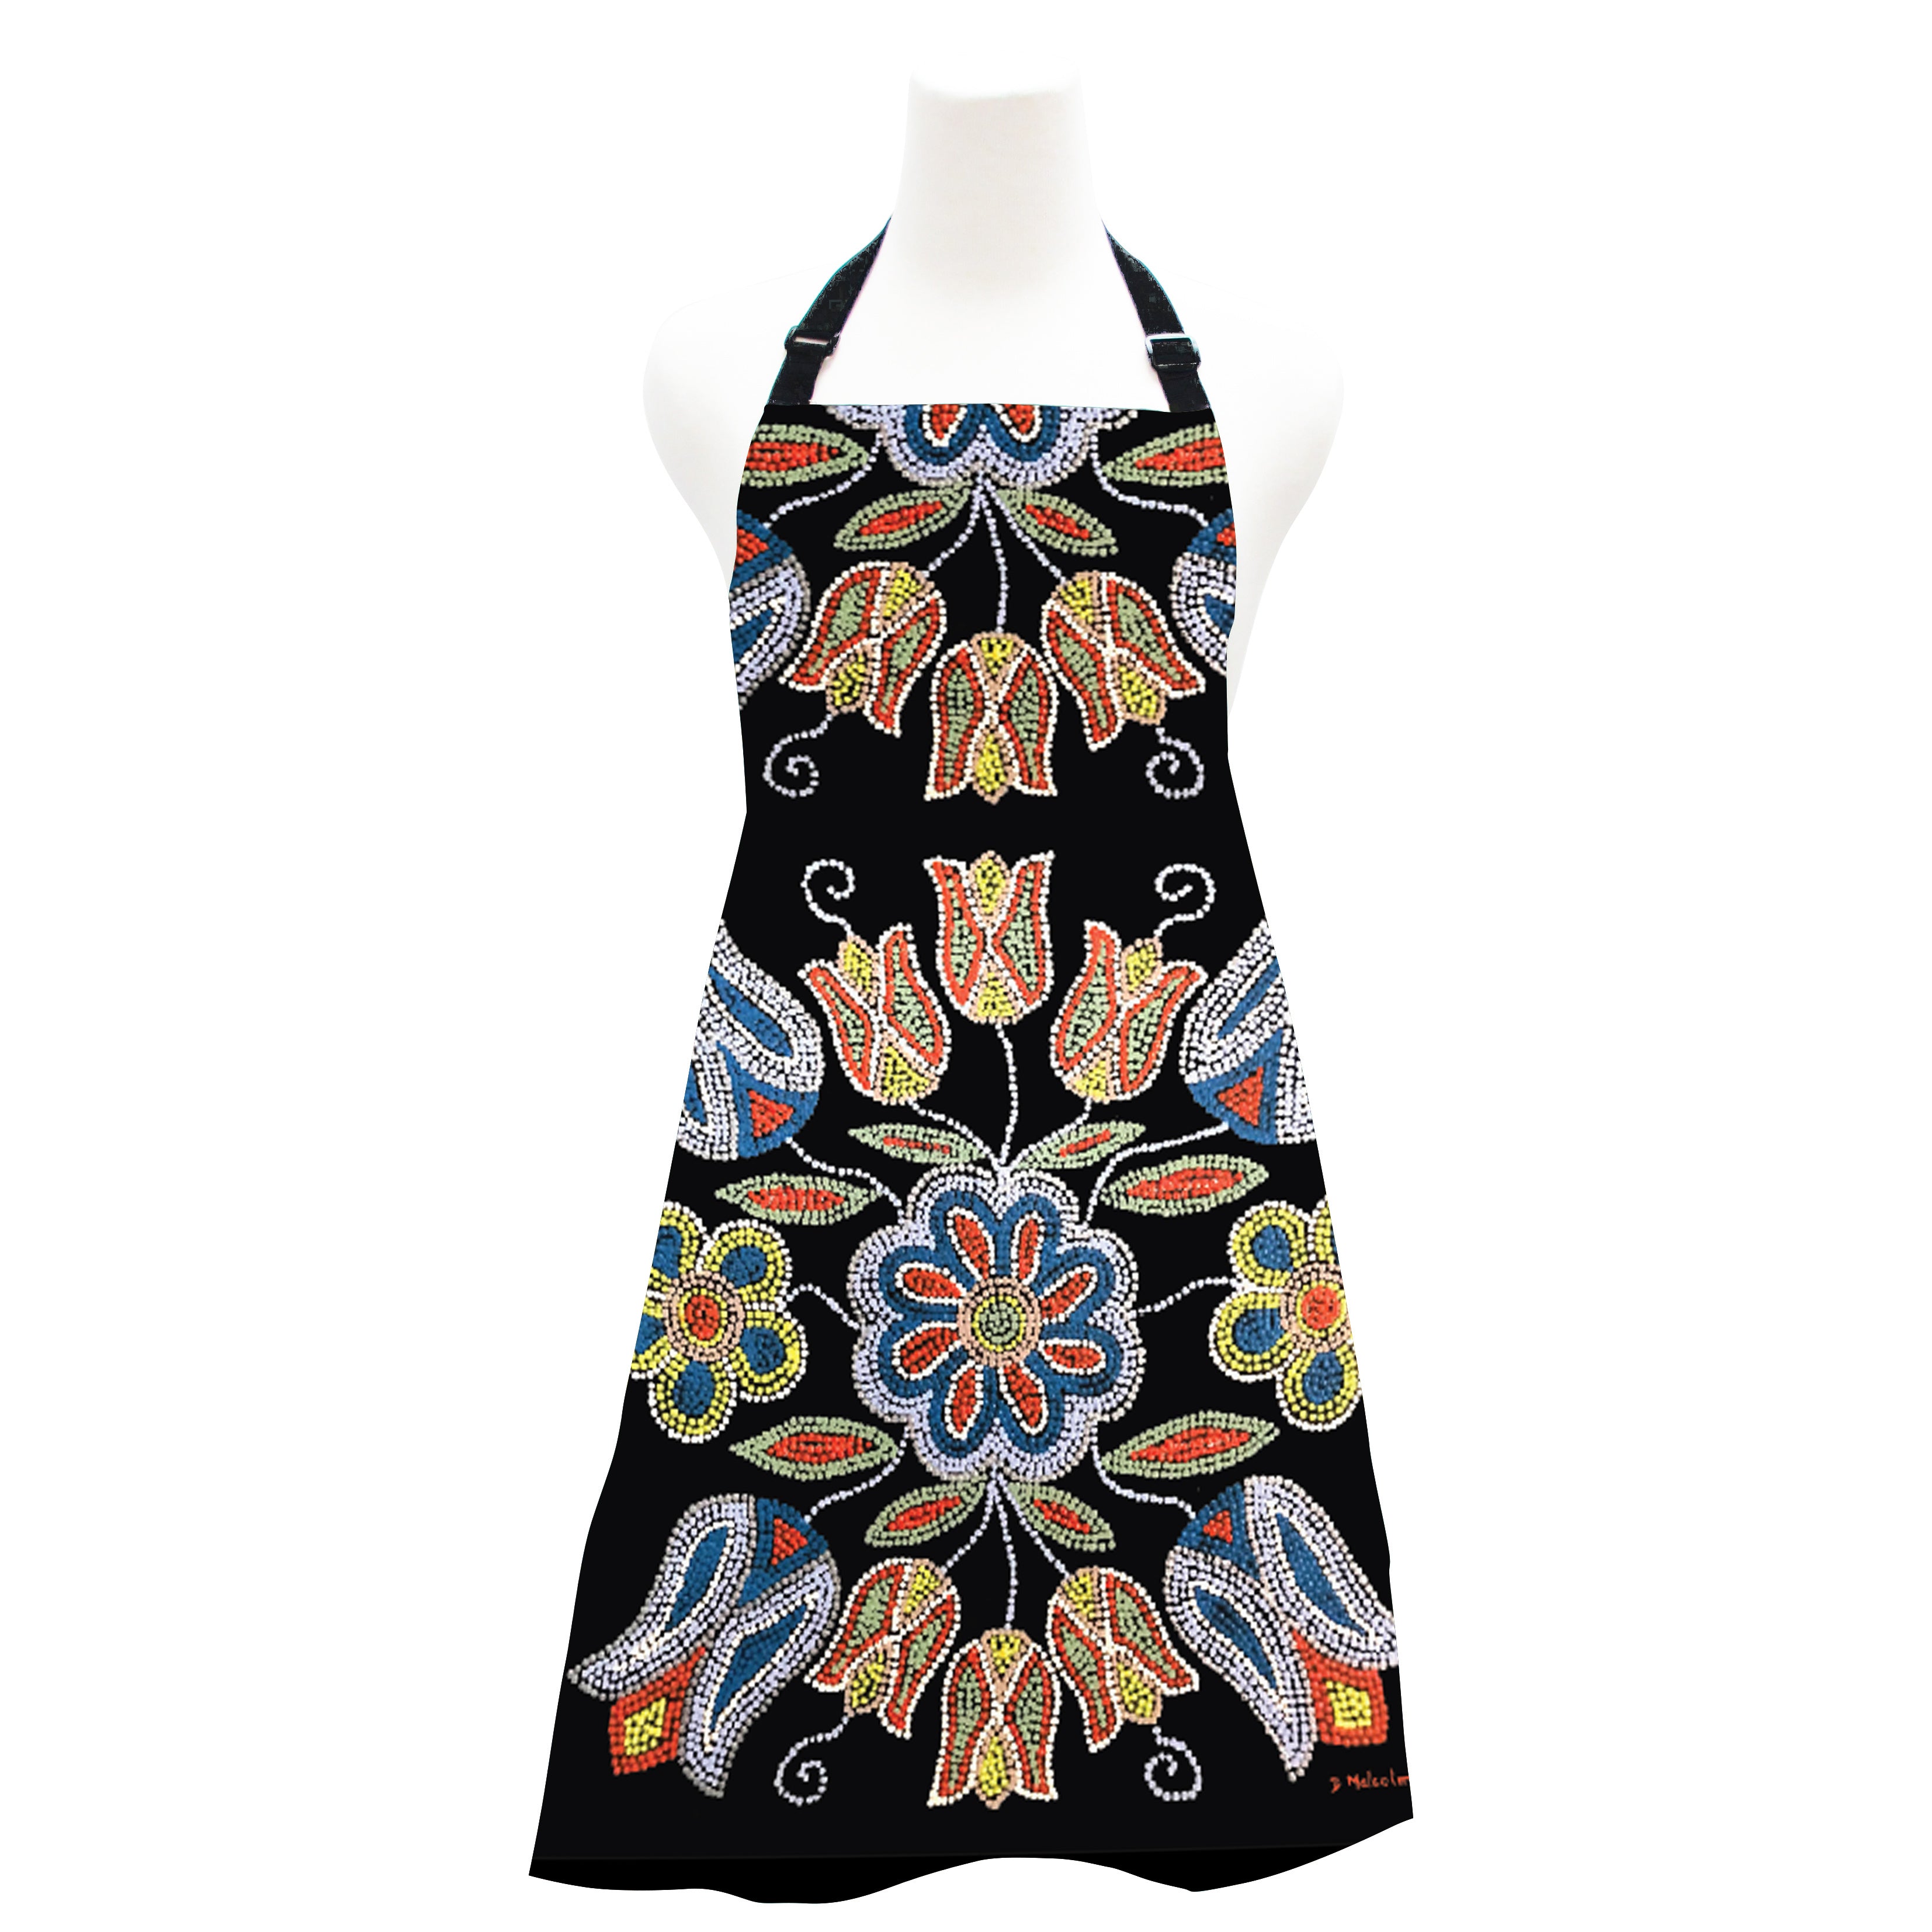 Deb Malcolm Silver Threads Apron - Out of Stock